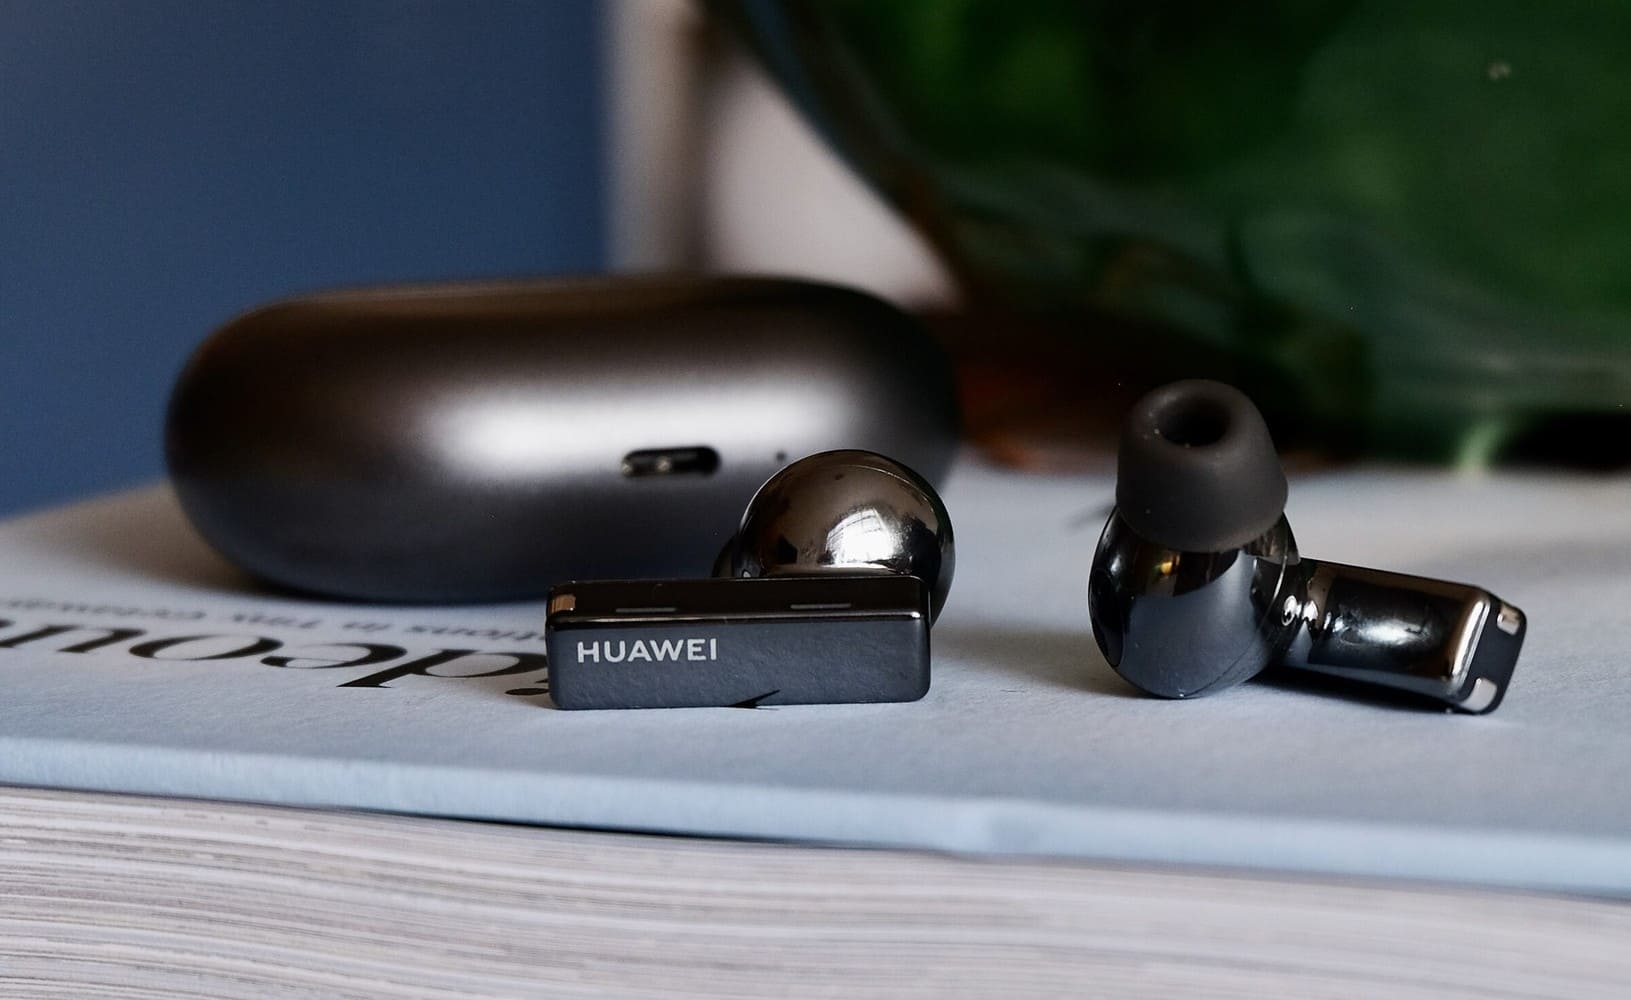 Huawei Freebuds Pro: the company introduced new TWS headphones - Release date and cost of Freebuds Pro and Freelance Pro - myheadphone.desigusxpro.com/en/